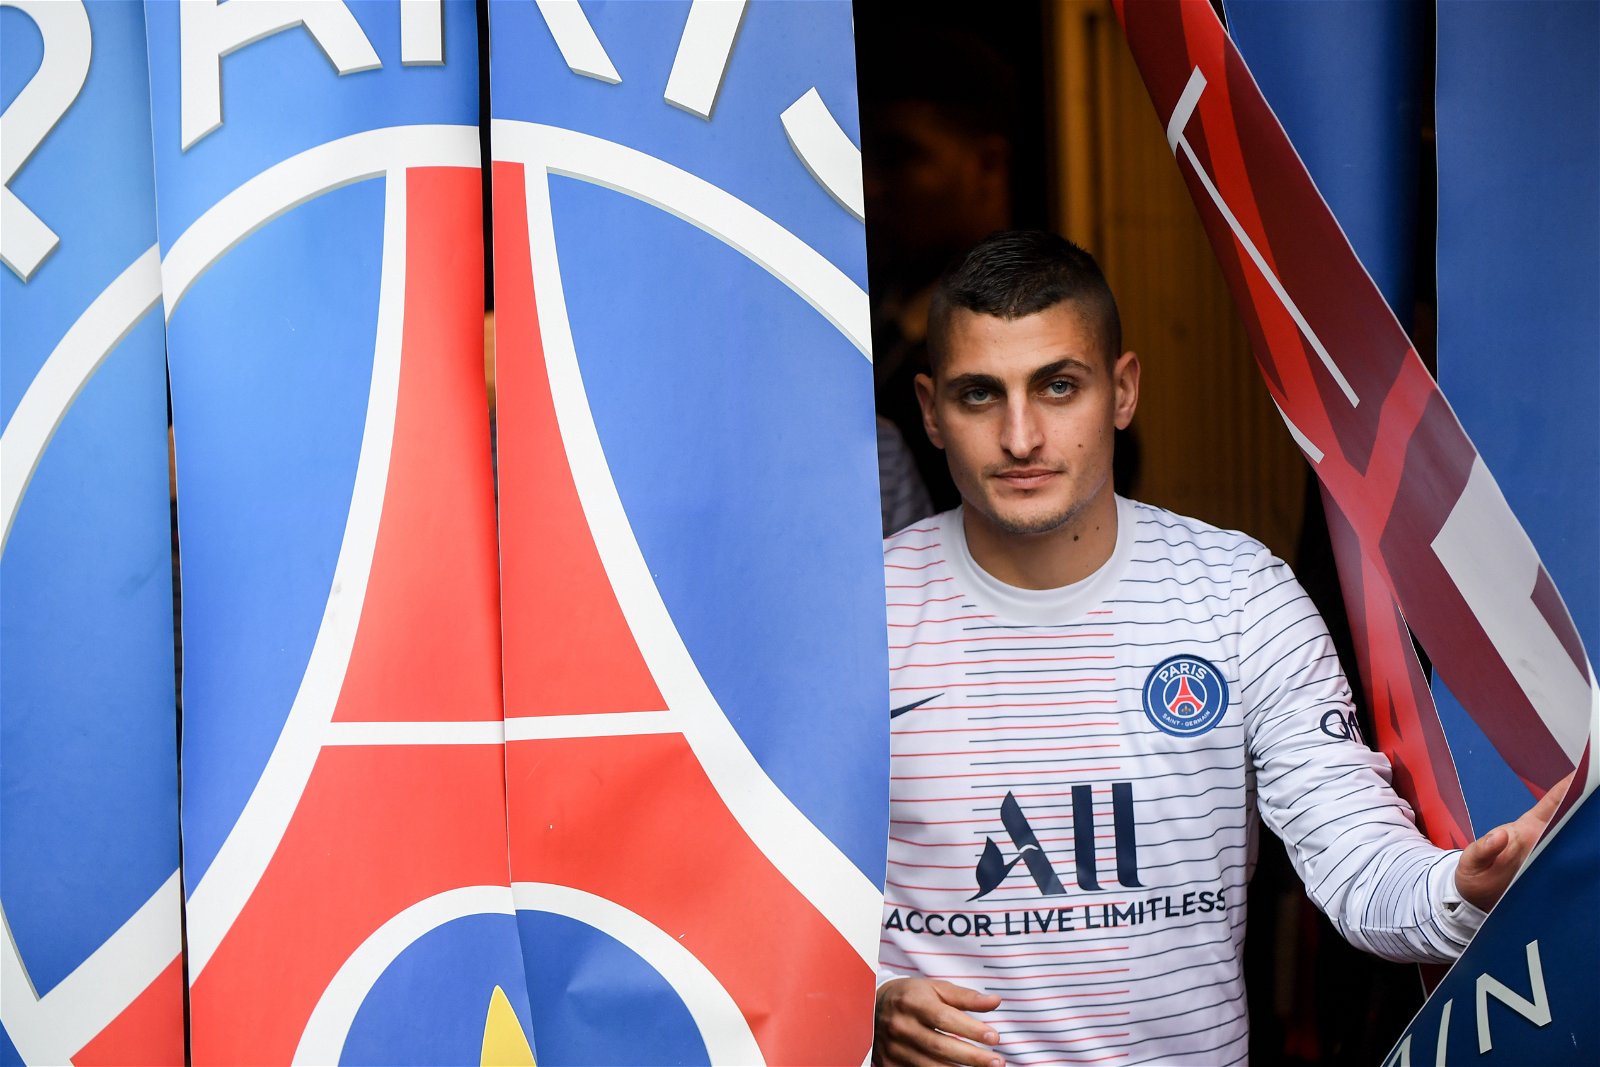 Italy midfielder Marco Verratti to sign new contract with Paris Saint-Germain